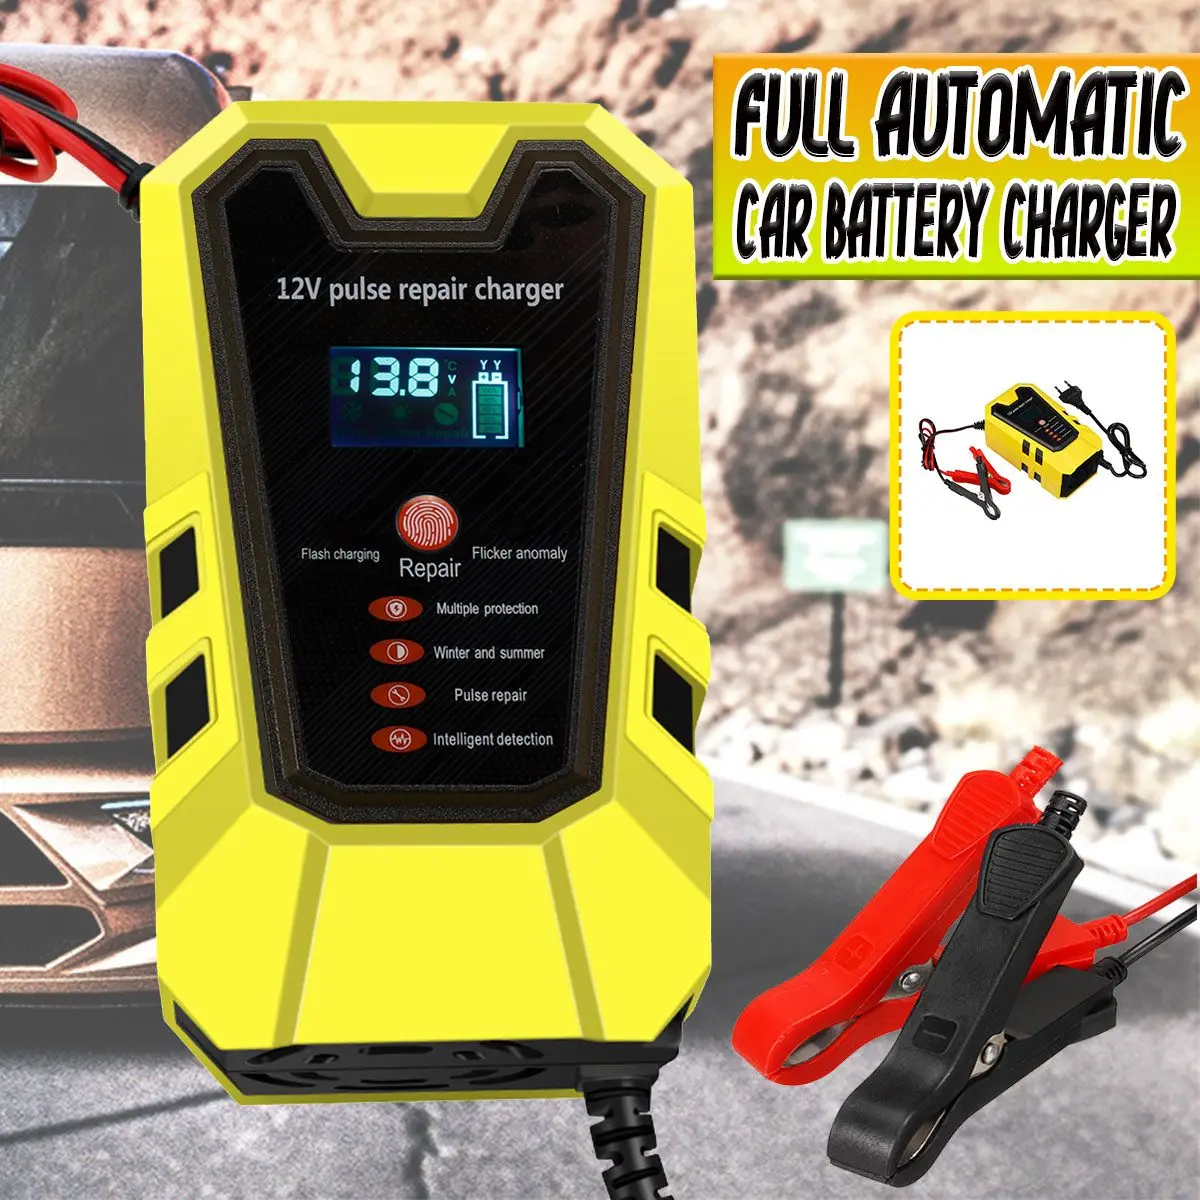 12V 6A LCD Smart Fast Car Battery Charger AC 110V-230V for Auto Motorcycle Batteries Intelligent Pulse Repair Battery Charging